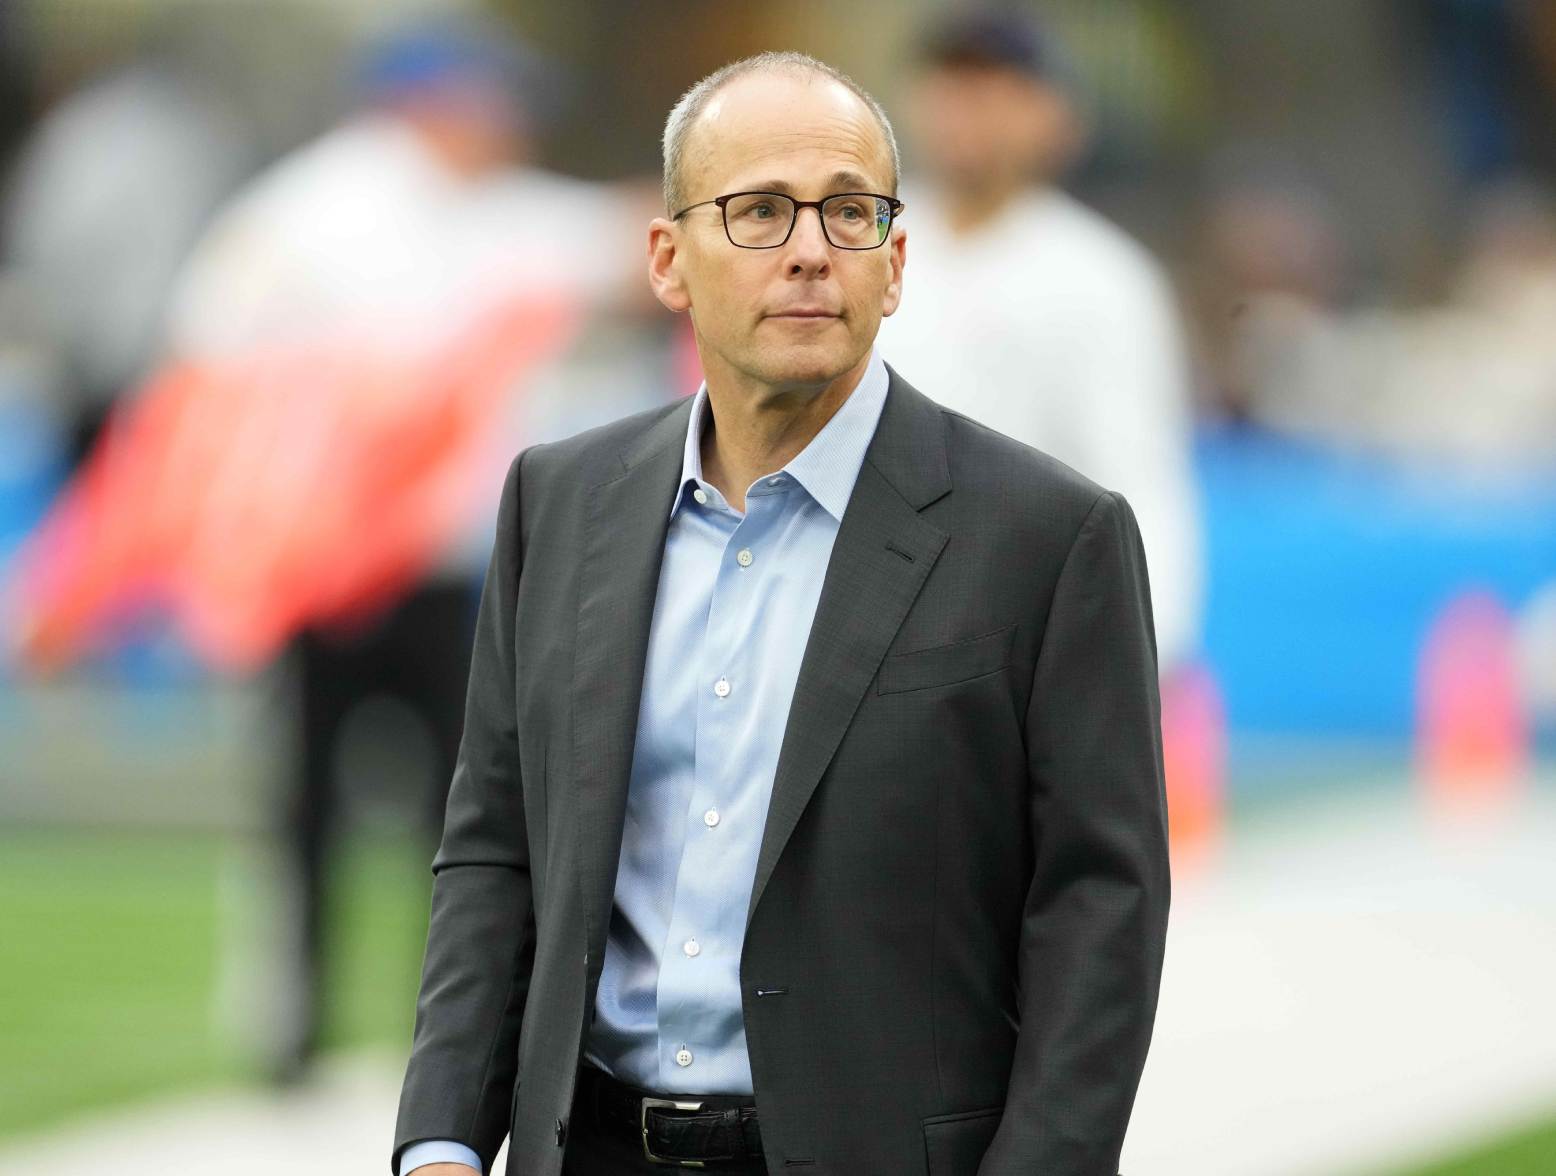 Oct 31, 2021; Inglewood, California, USA; New England Patriots president Jonathan Kraft reacts during the game against the Los Angeles Chargers at SoFi Stadium. Credit: Kirby Lee-USA TODAY Sports